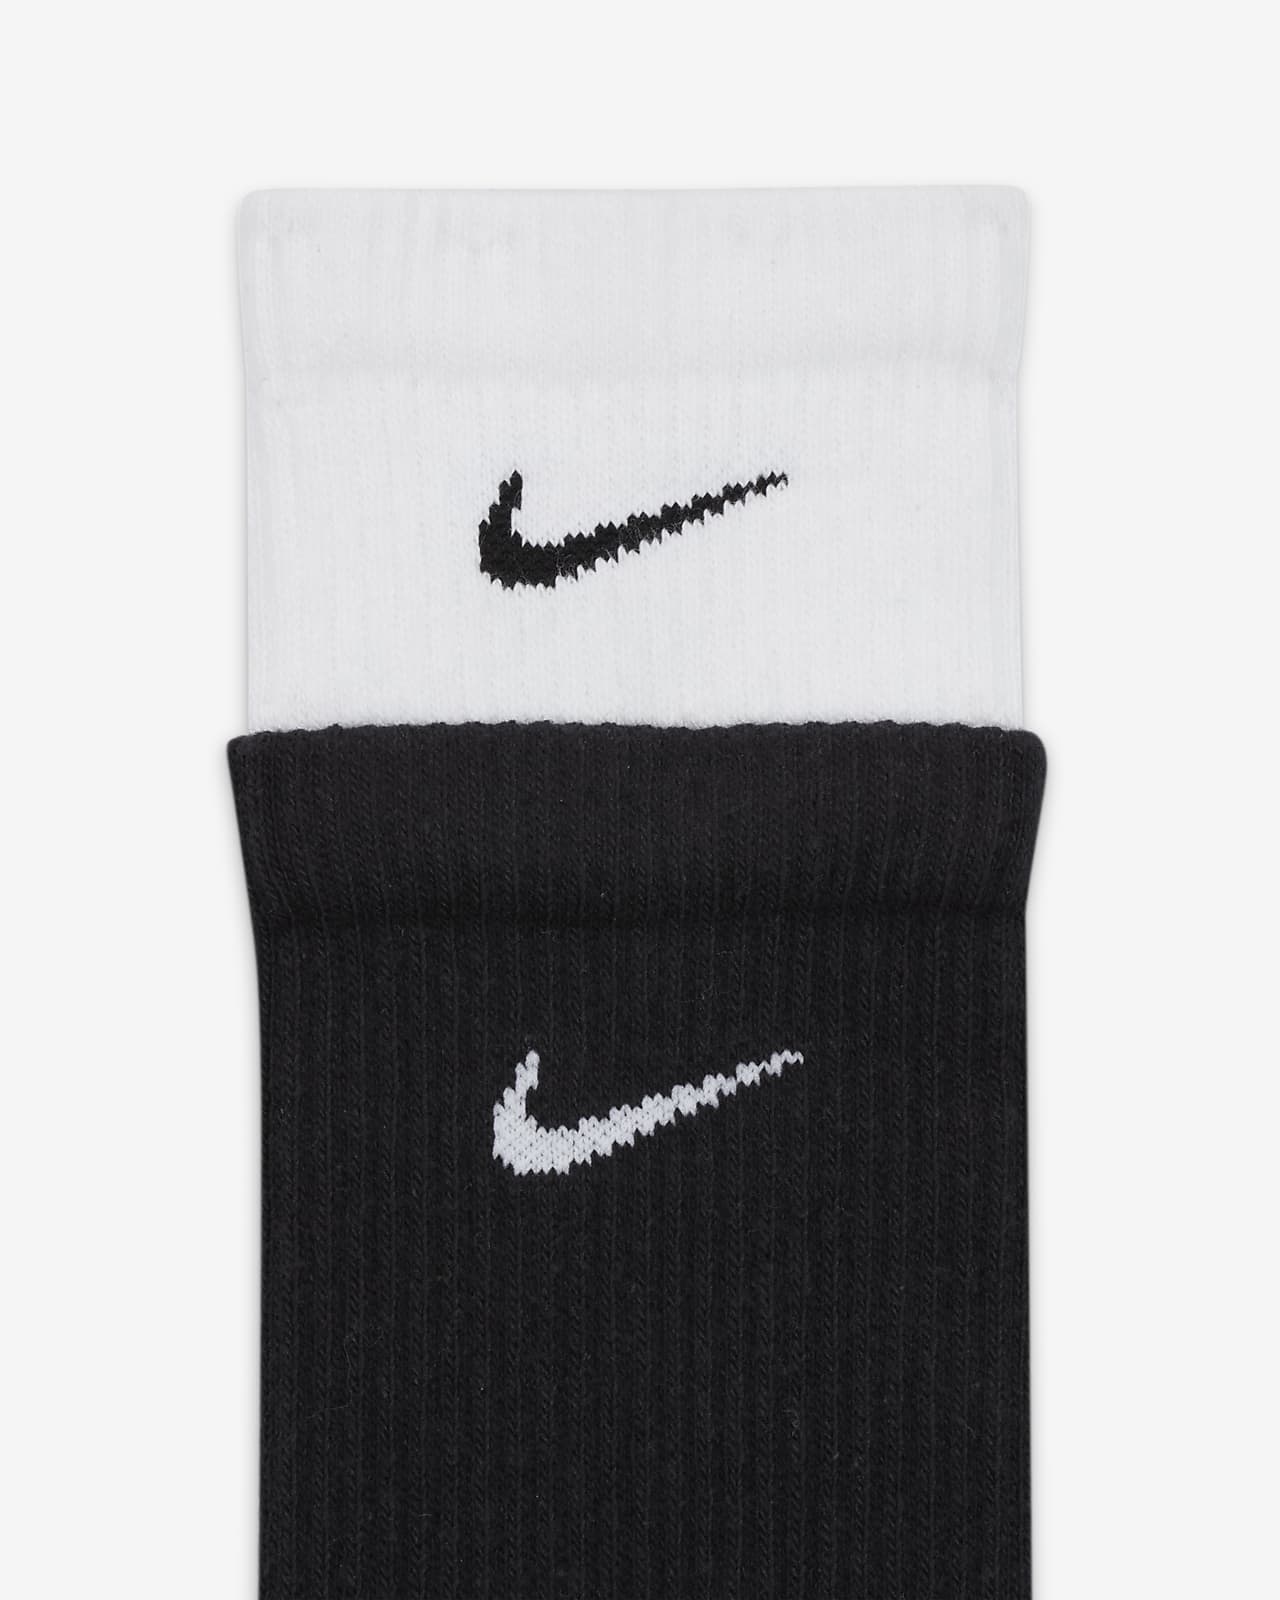 Chaussettes Nike Everyday Plus Cushioned